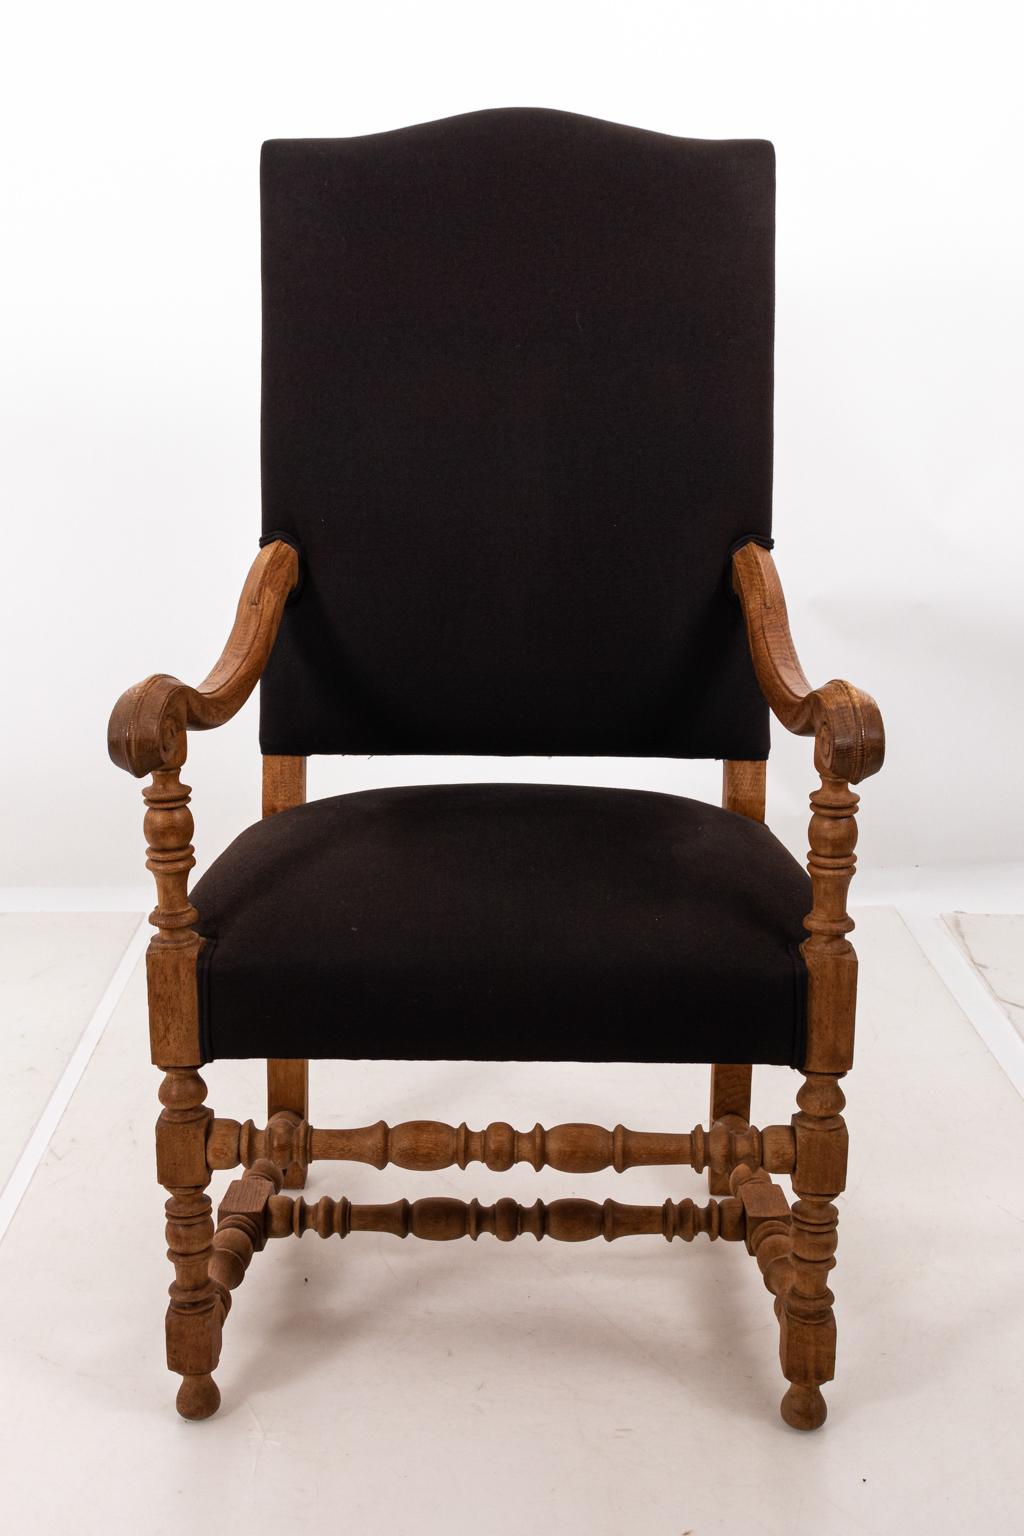 Louis XIII style upholstered armchair with bleached oak frame and black Belgian linen, circa mid-20th century. The piece also features scrolled arms and ball-and-ring turned legs. Please note of wear consistent with age.